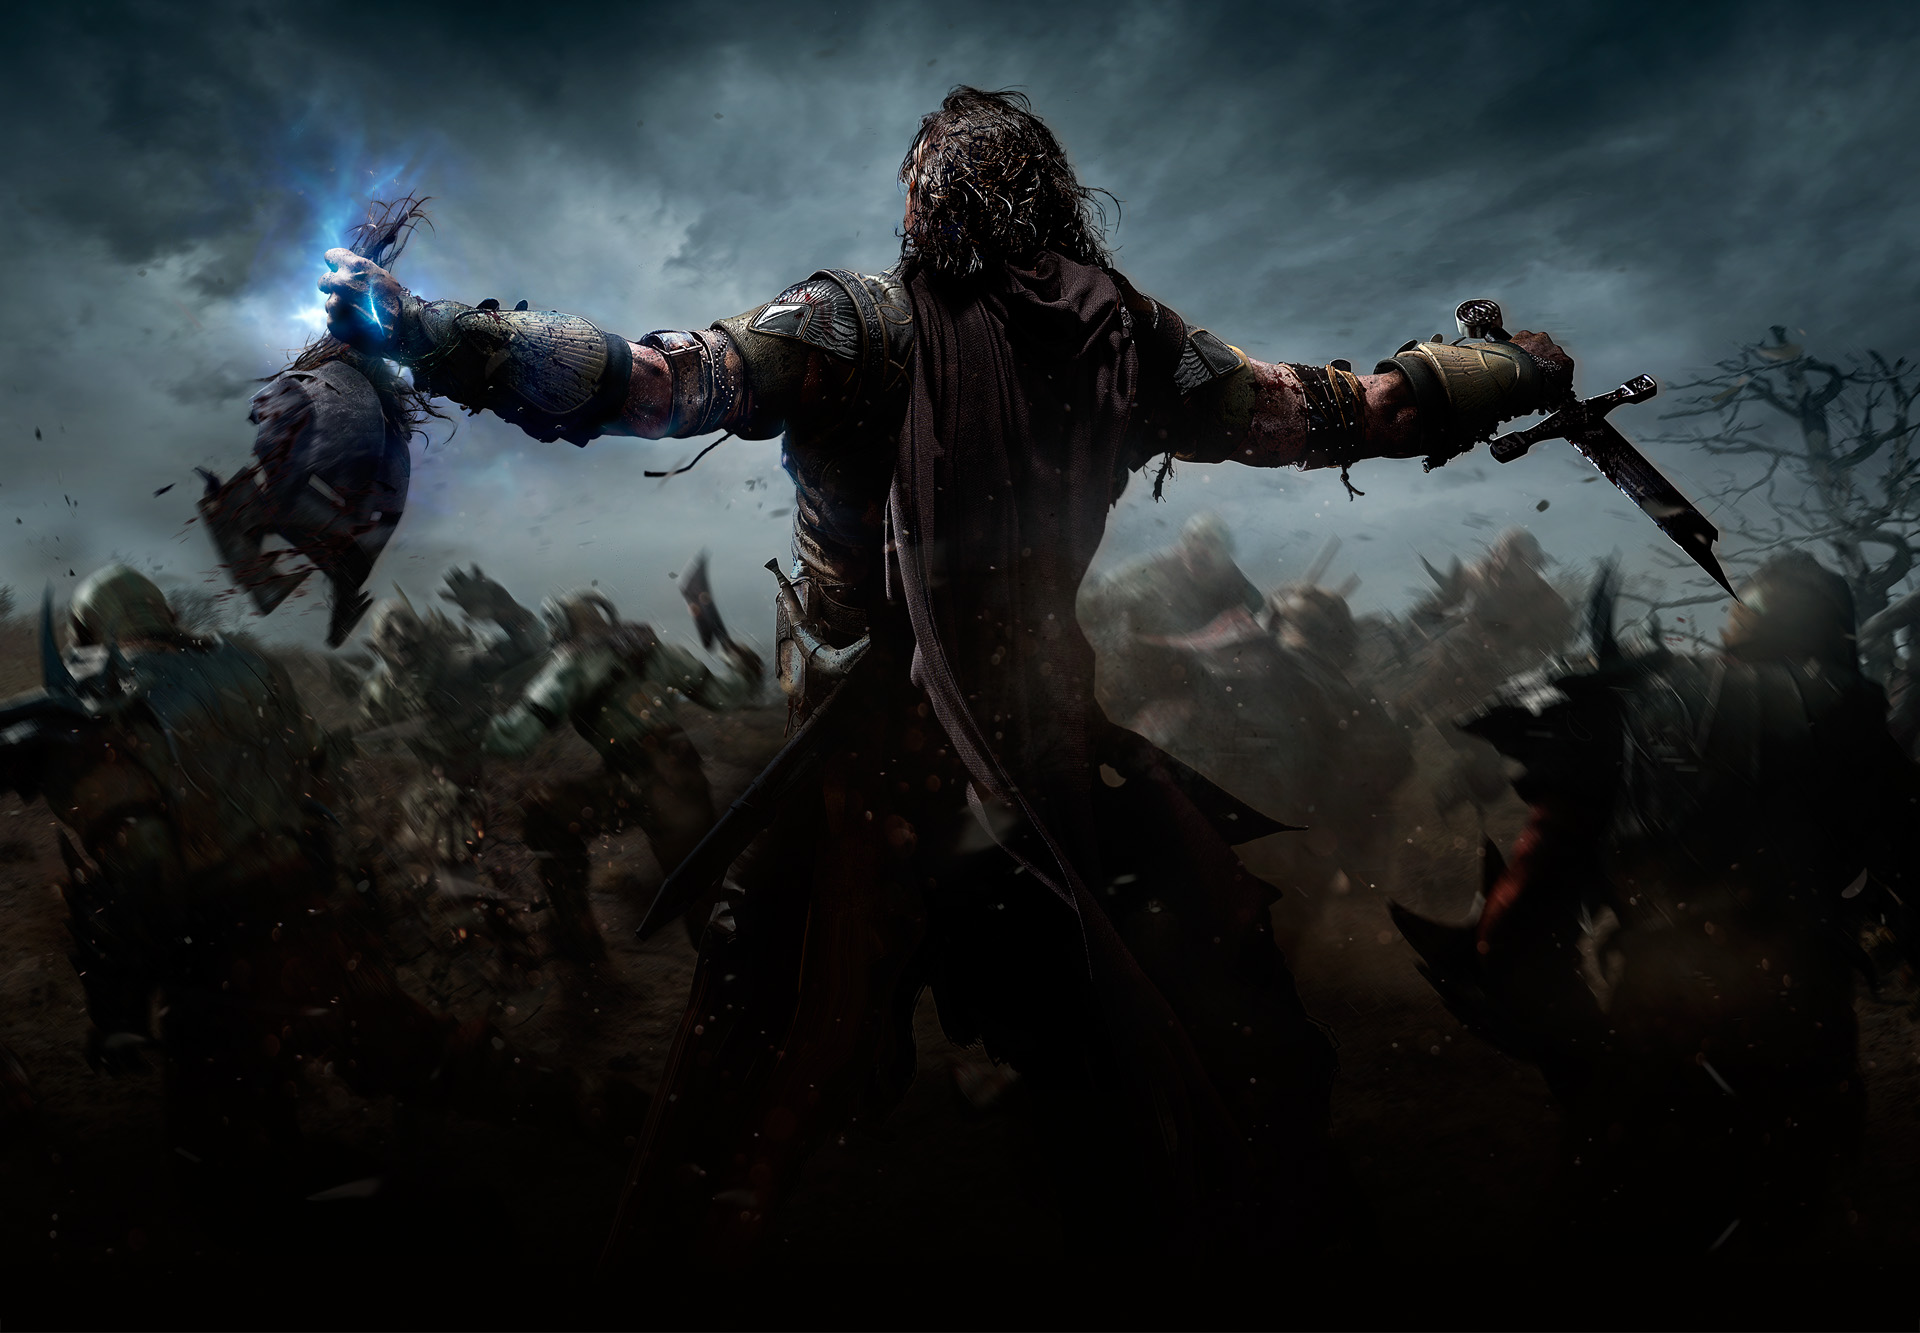 Middle-earth: Shadow of Mordor, Middle-earth: Shadow of War Wiki